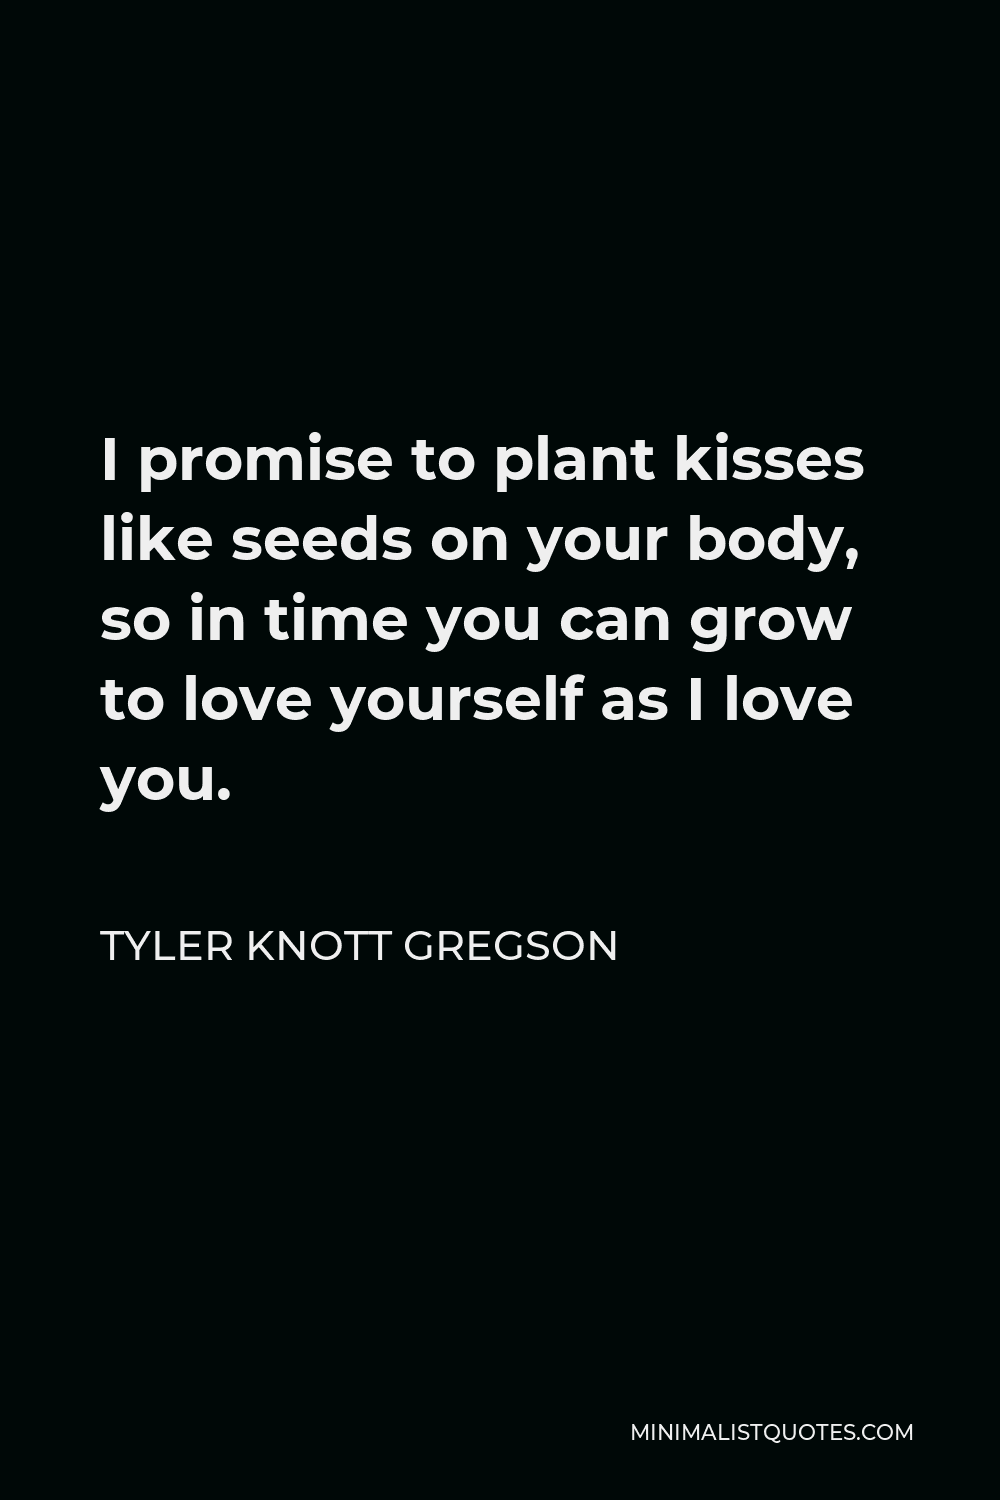 Tyler Knott Gregson Quote - I promise to plant kisses like seeds on your body, so in time you can grow to love yourself as I love you.